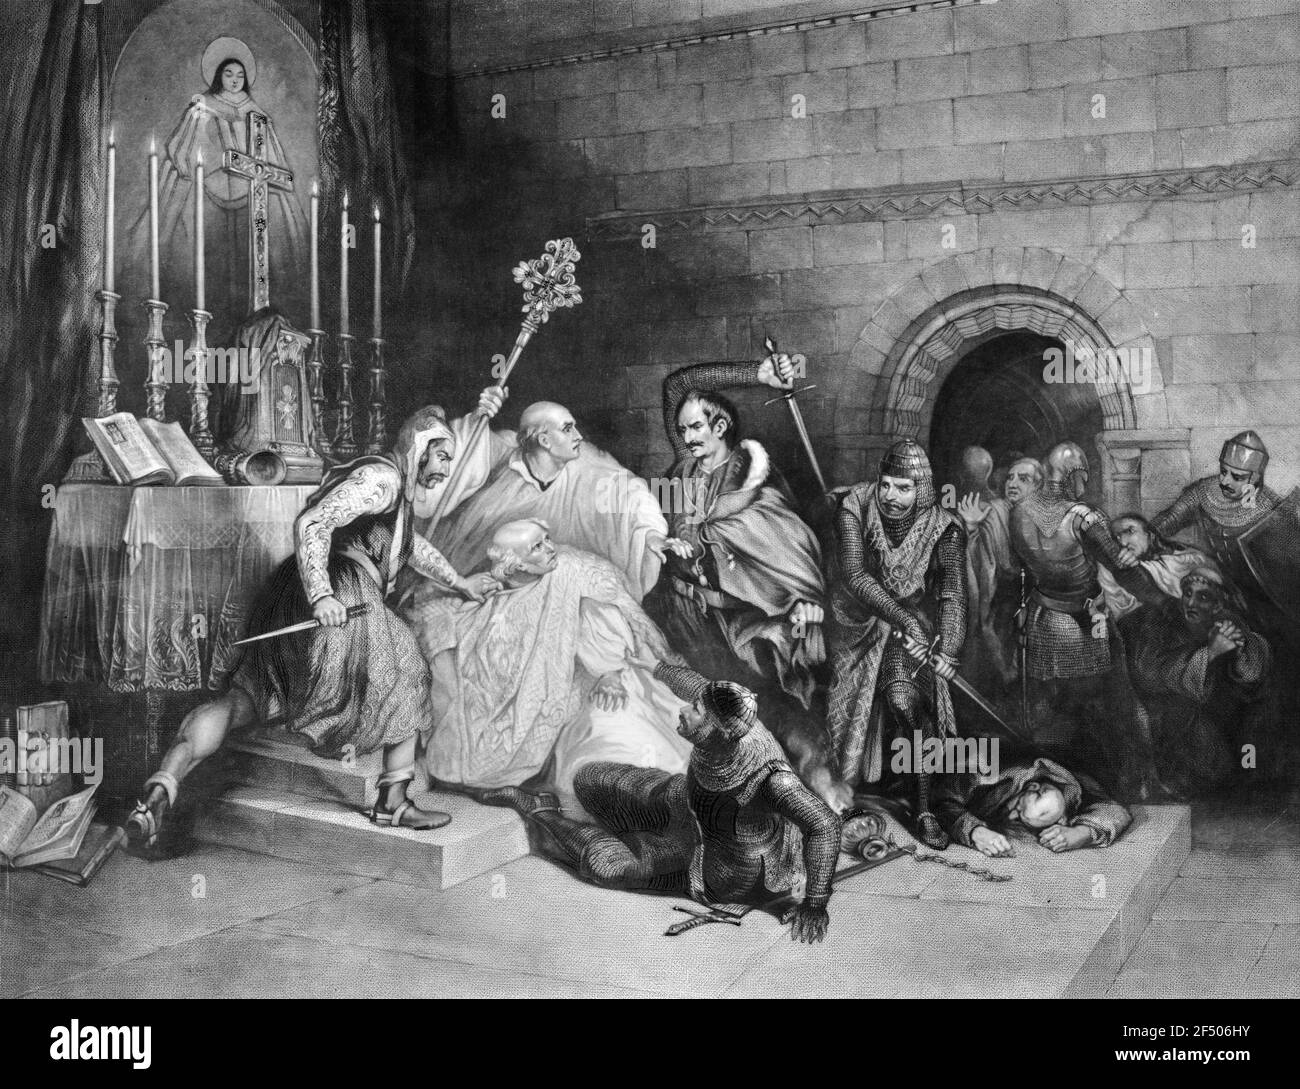 Thomas Becket.  An 1865 illustration by Georg Zobel, after an original work by Charles Harvey Weigall, showing the murder of Thomas a Becket. Saint Thomas Becket  (1119/1120-1170) was Archbishop  of Canterbury when killed by followers of King Henry II of England in 1170 Stock Photo